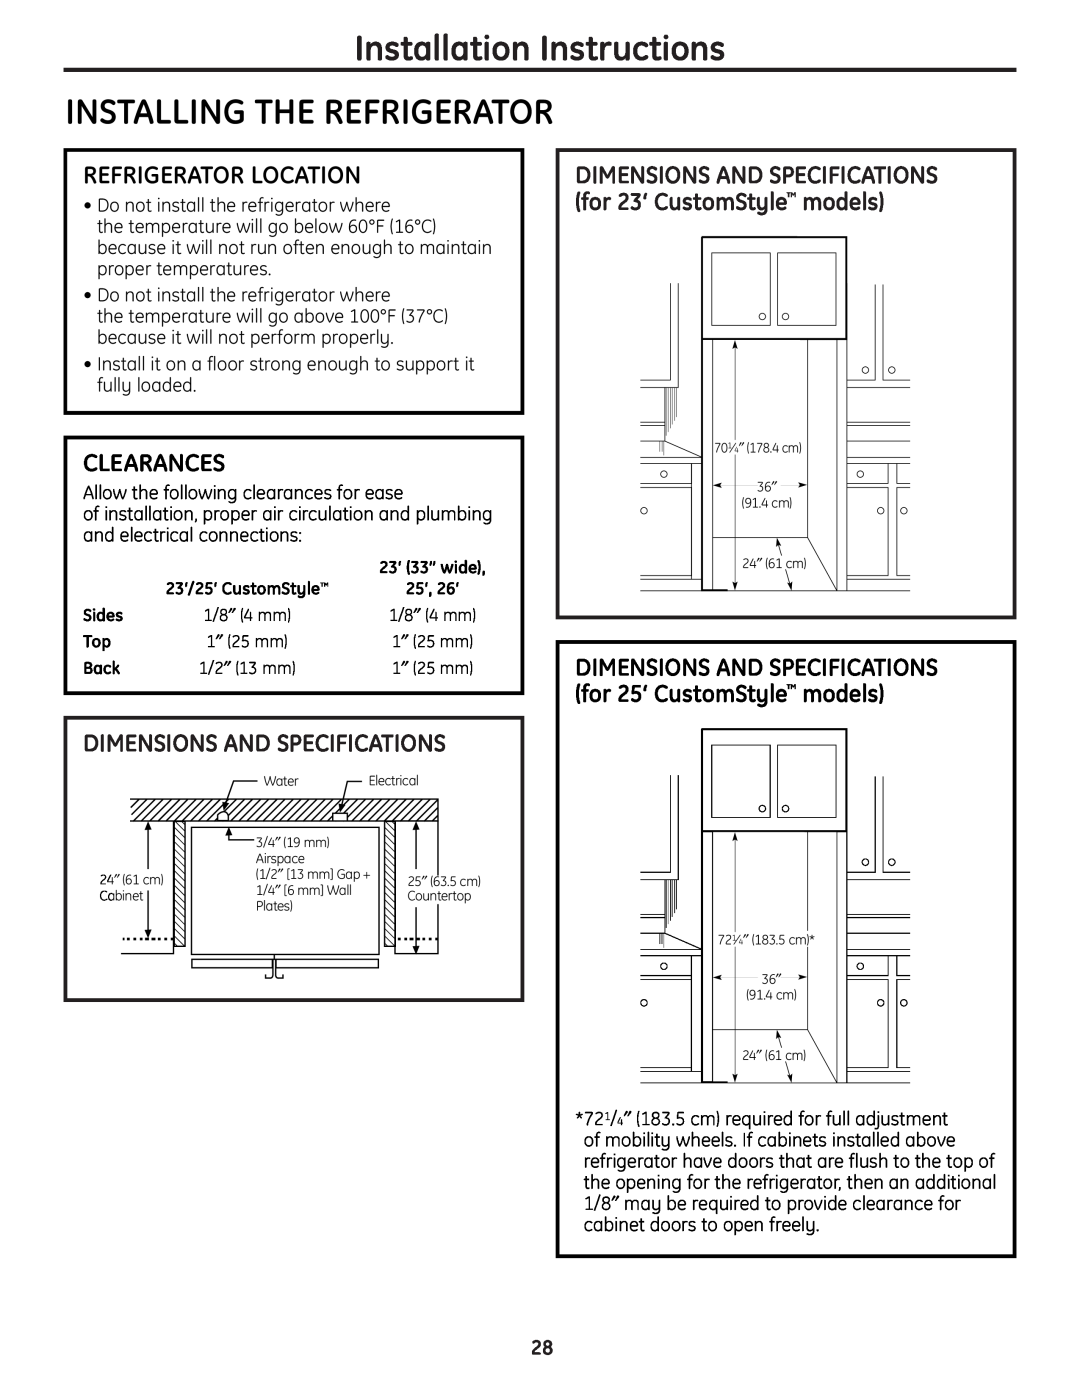 GE 26, 25, 23 Installation Instructions INSTALLING THE REFRIGERATOR, Refrigerator Location, Clearances 